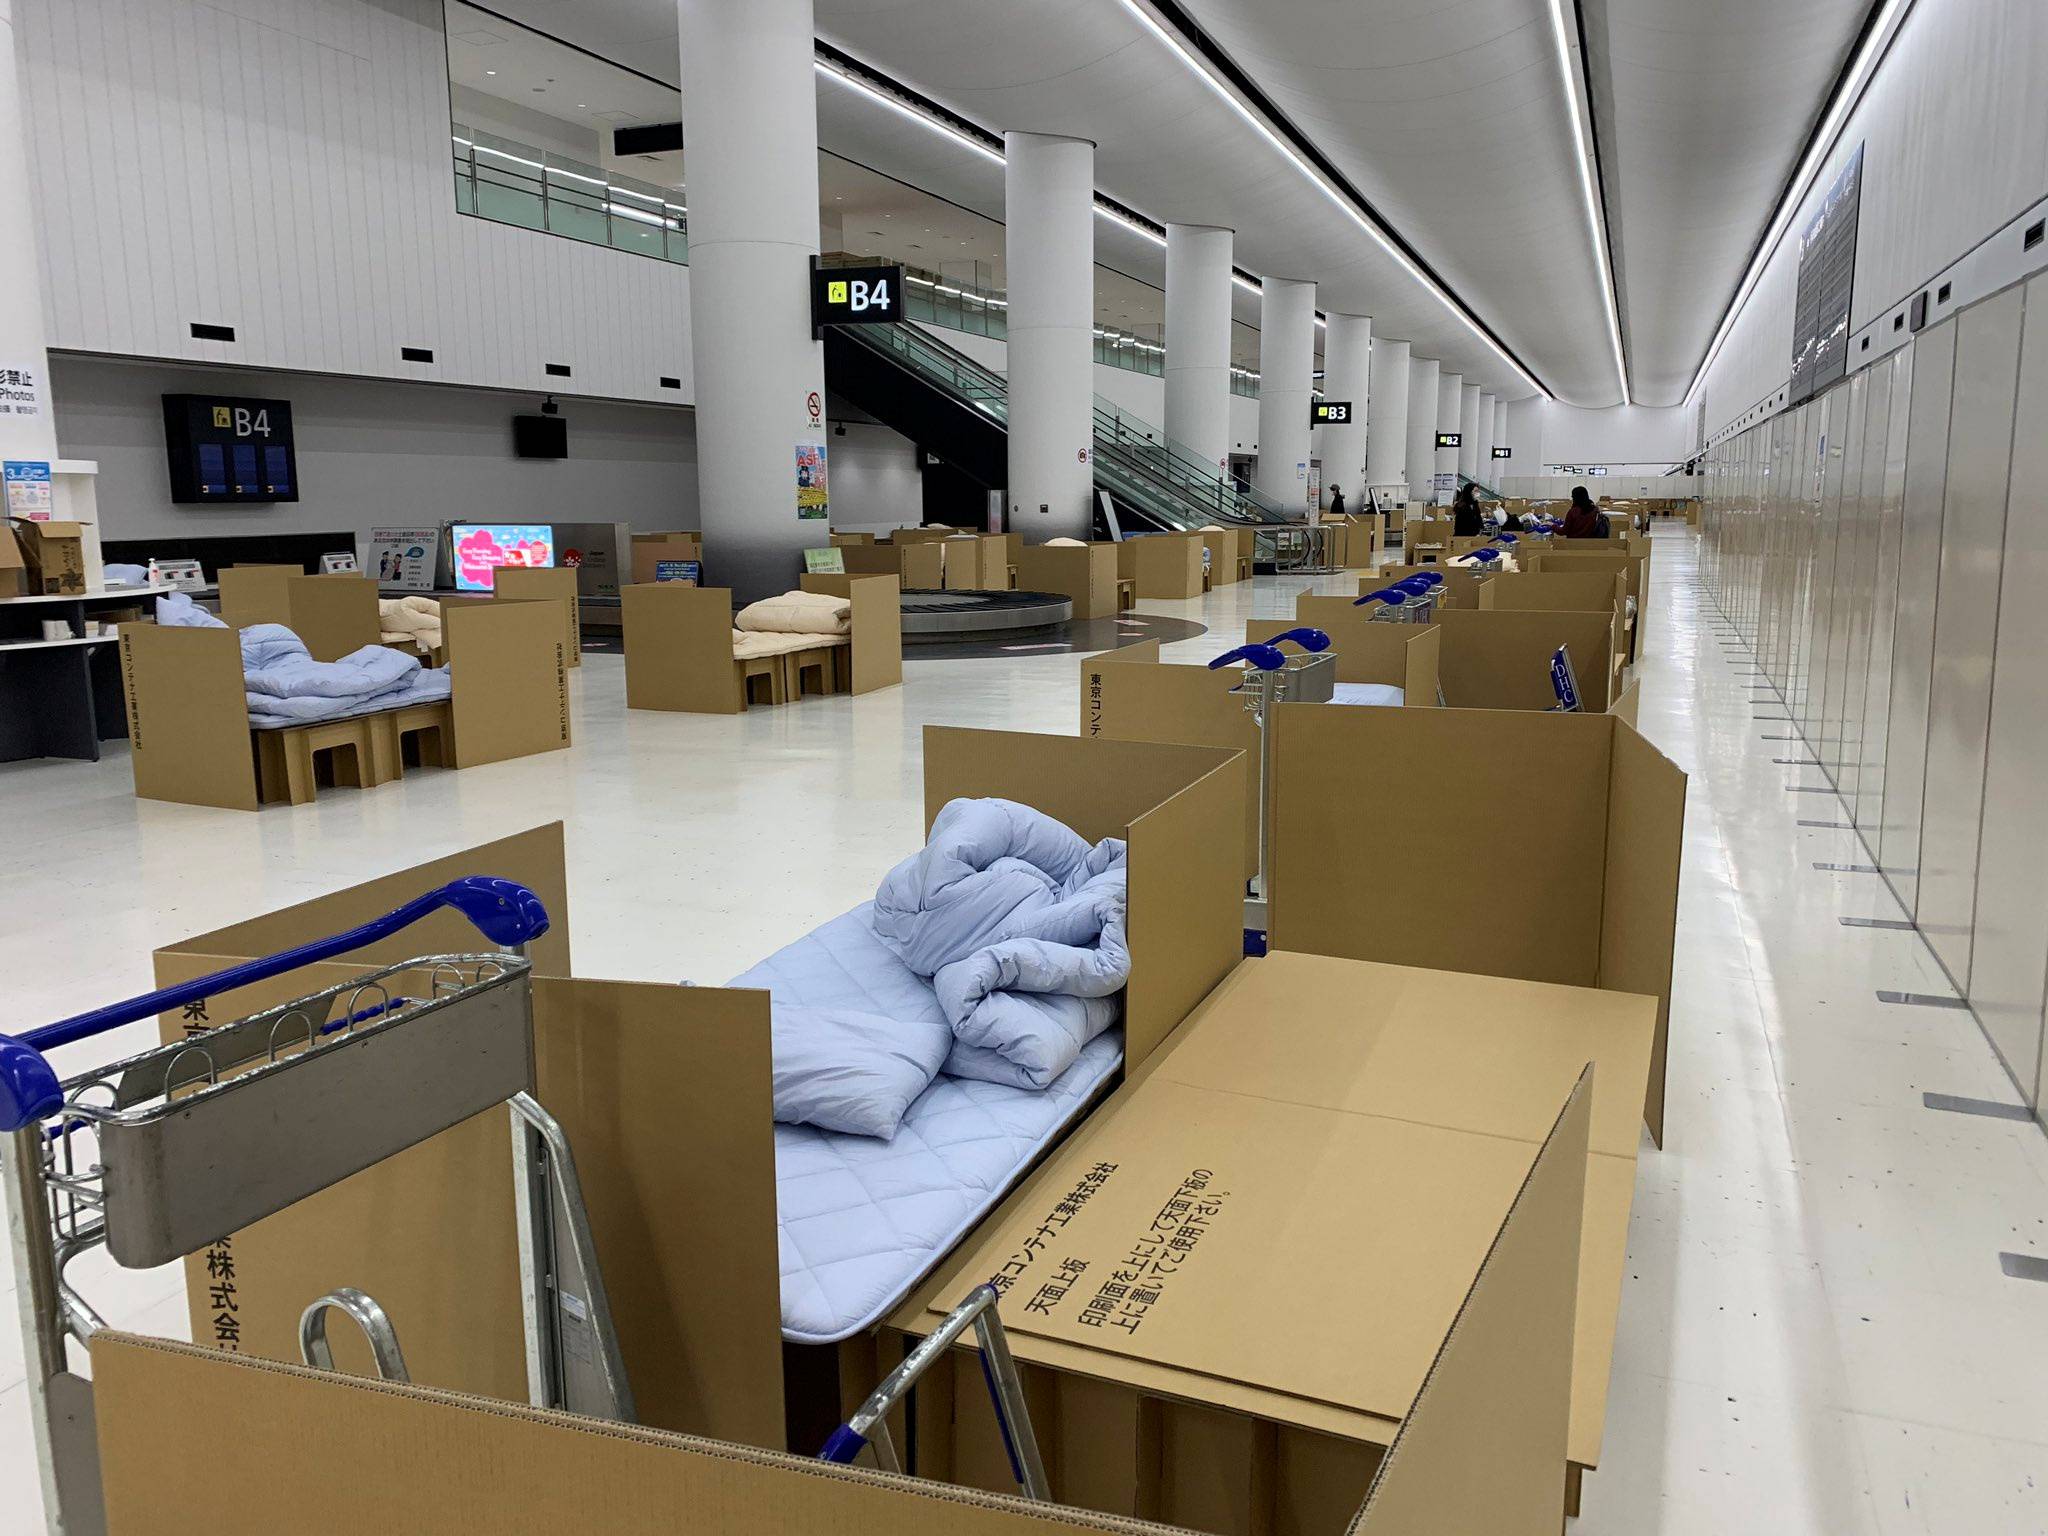 Cardboard beds are used to temporarily quarantine passengers as they wait for COVID-19 test results, at Narita Airport in Chiba Prefecture on April 9, in this photo obtained from social media. | TWITTER/@WASABI1094 / VIA REUTERS